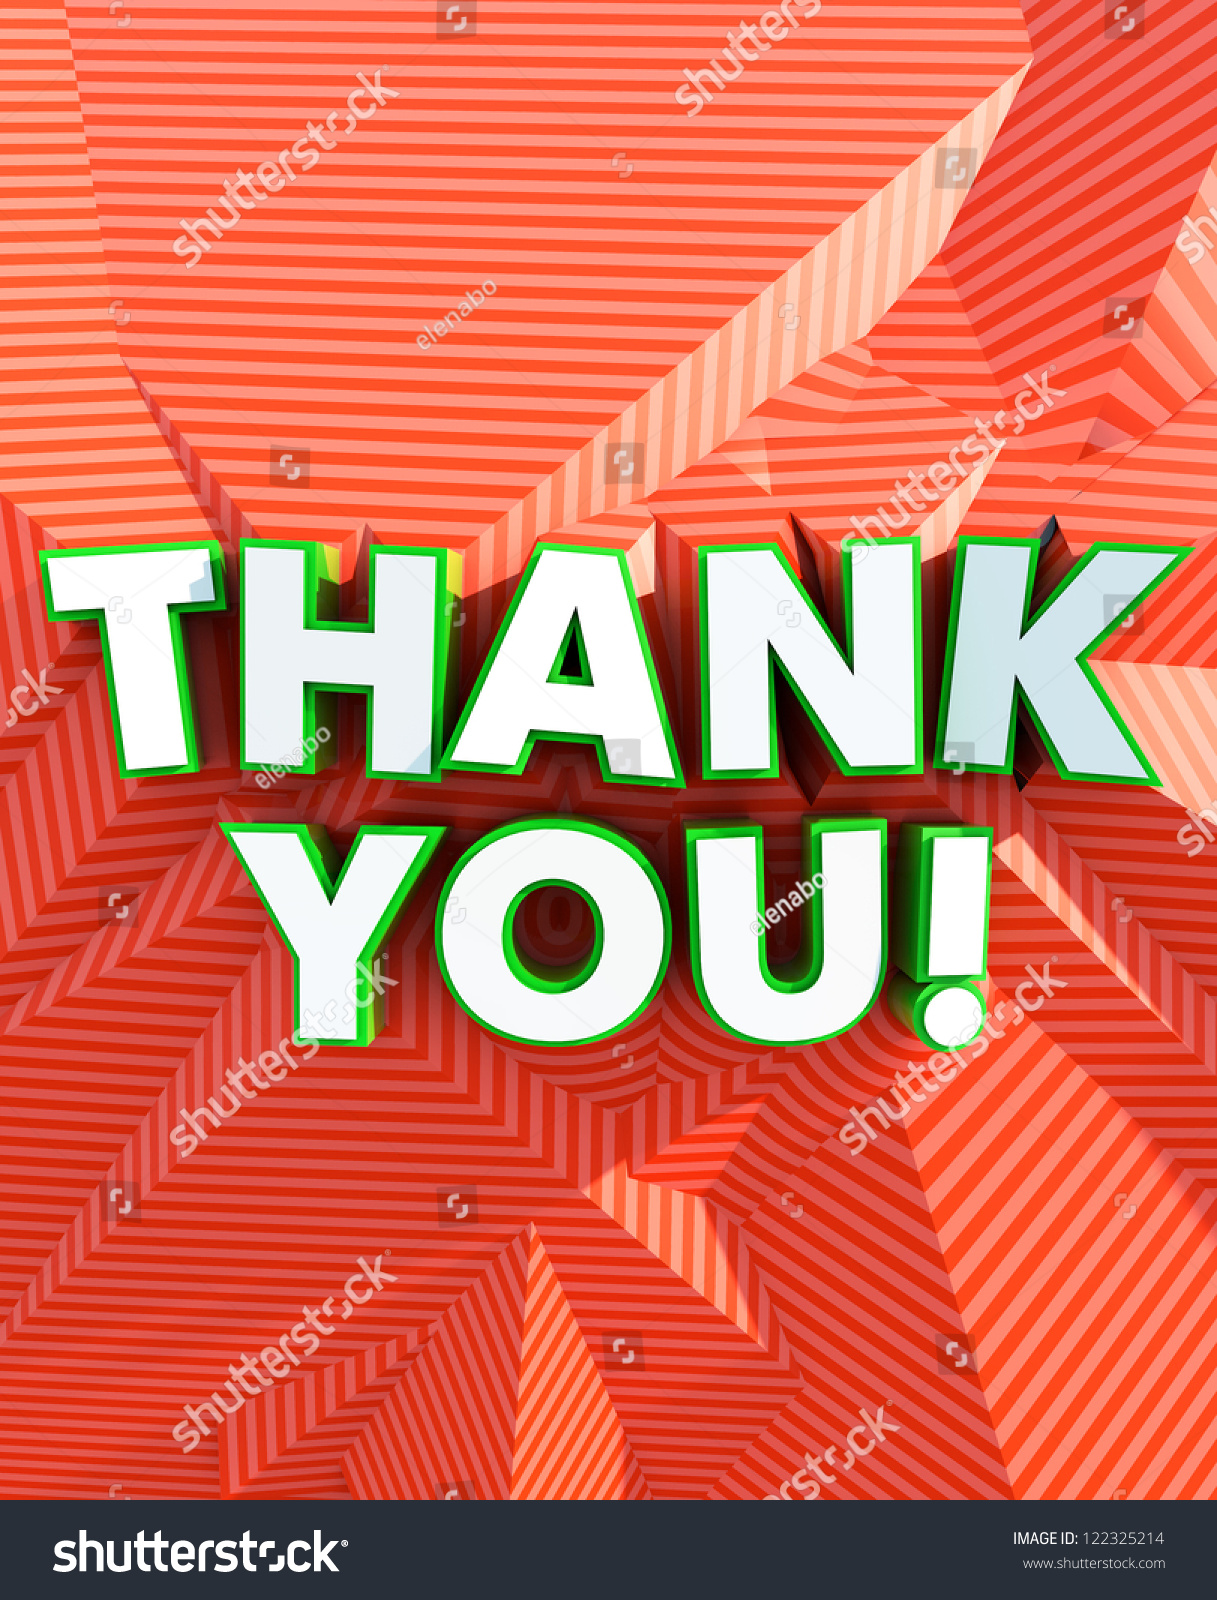 Thank You! Poster Stock Photo 122325214 : Shutterstock